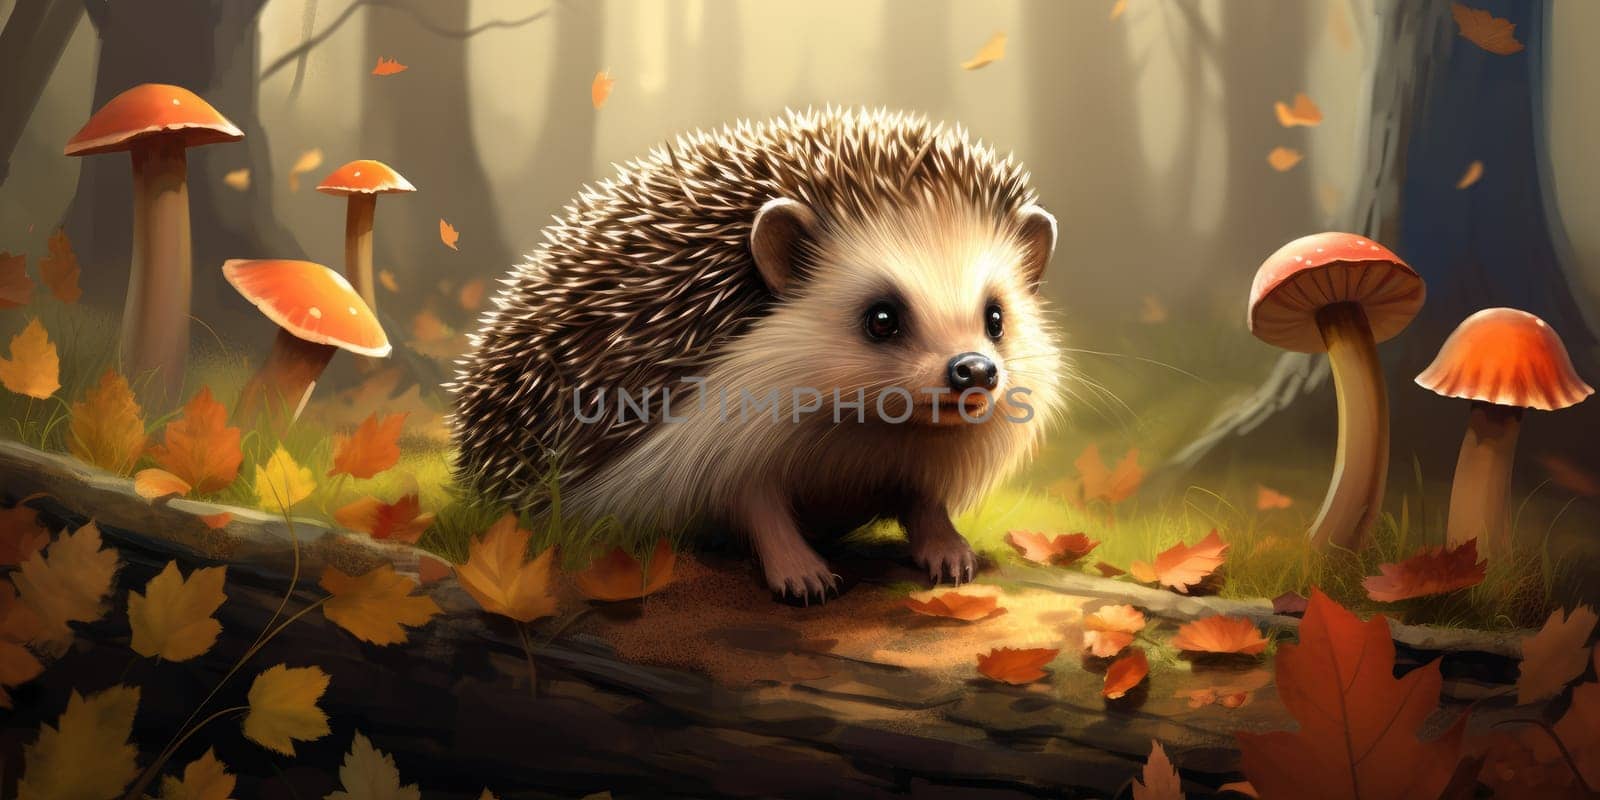 Cute hedgehog in the nature, wildlife concept by Kadula